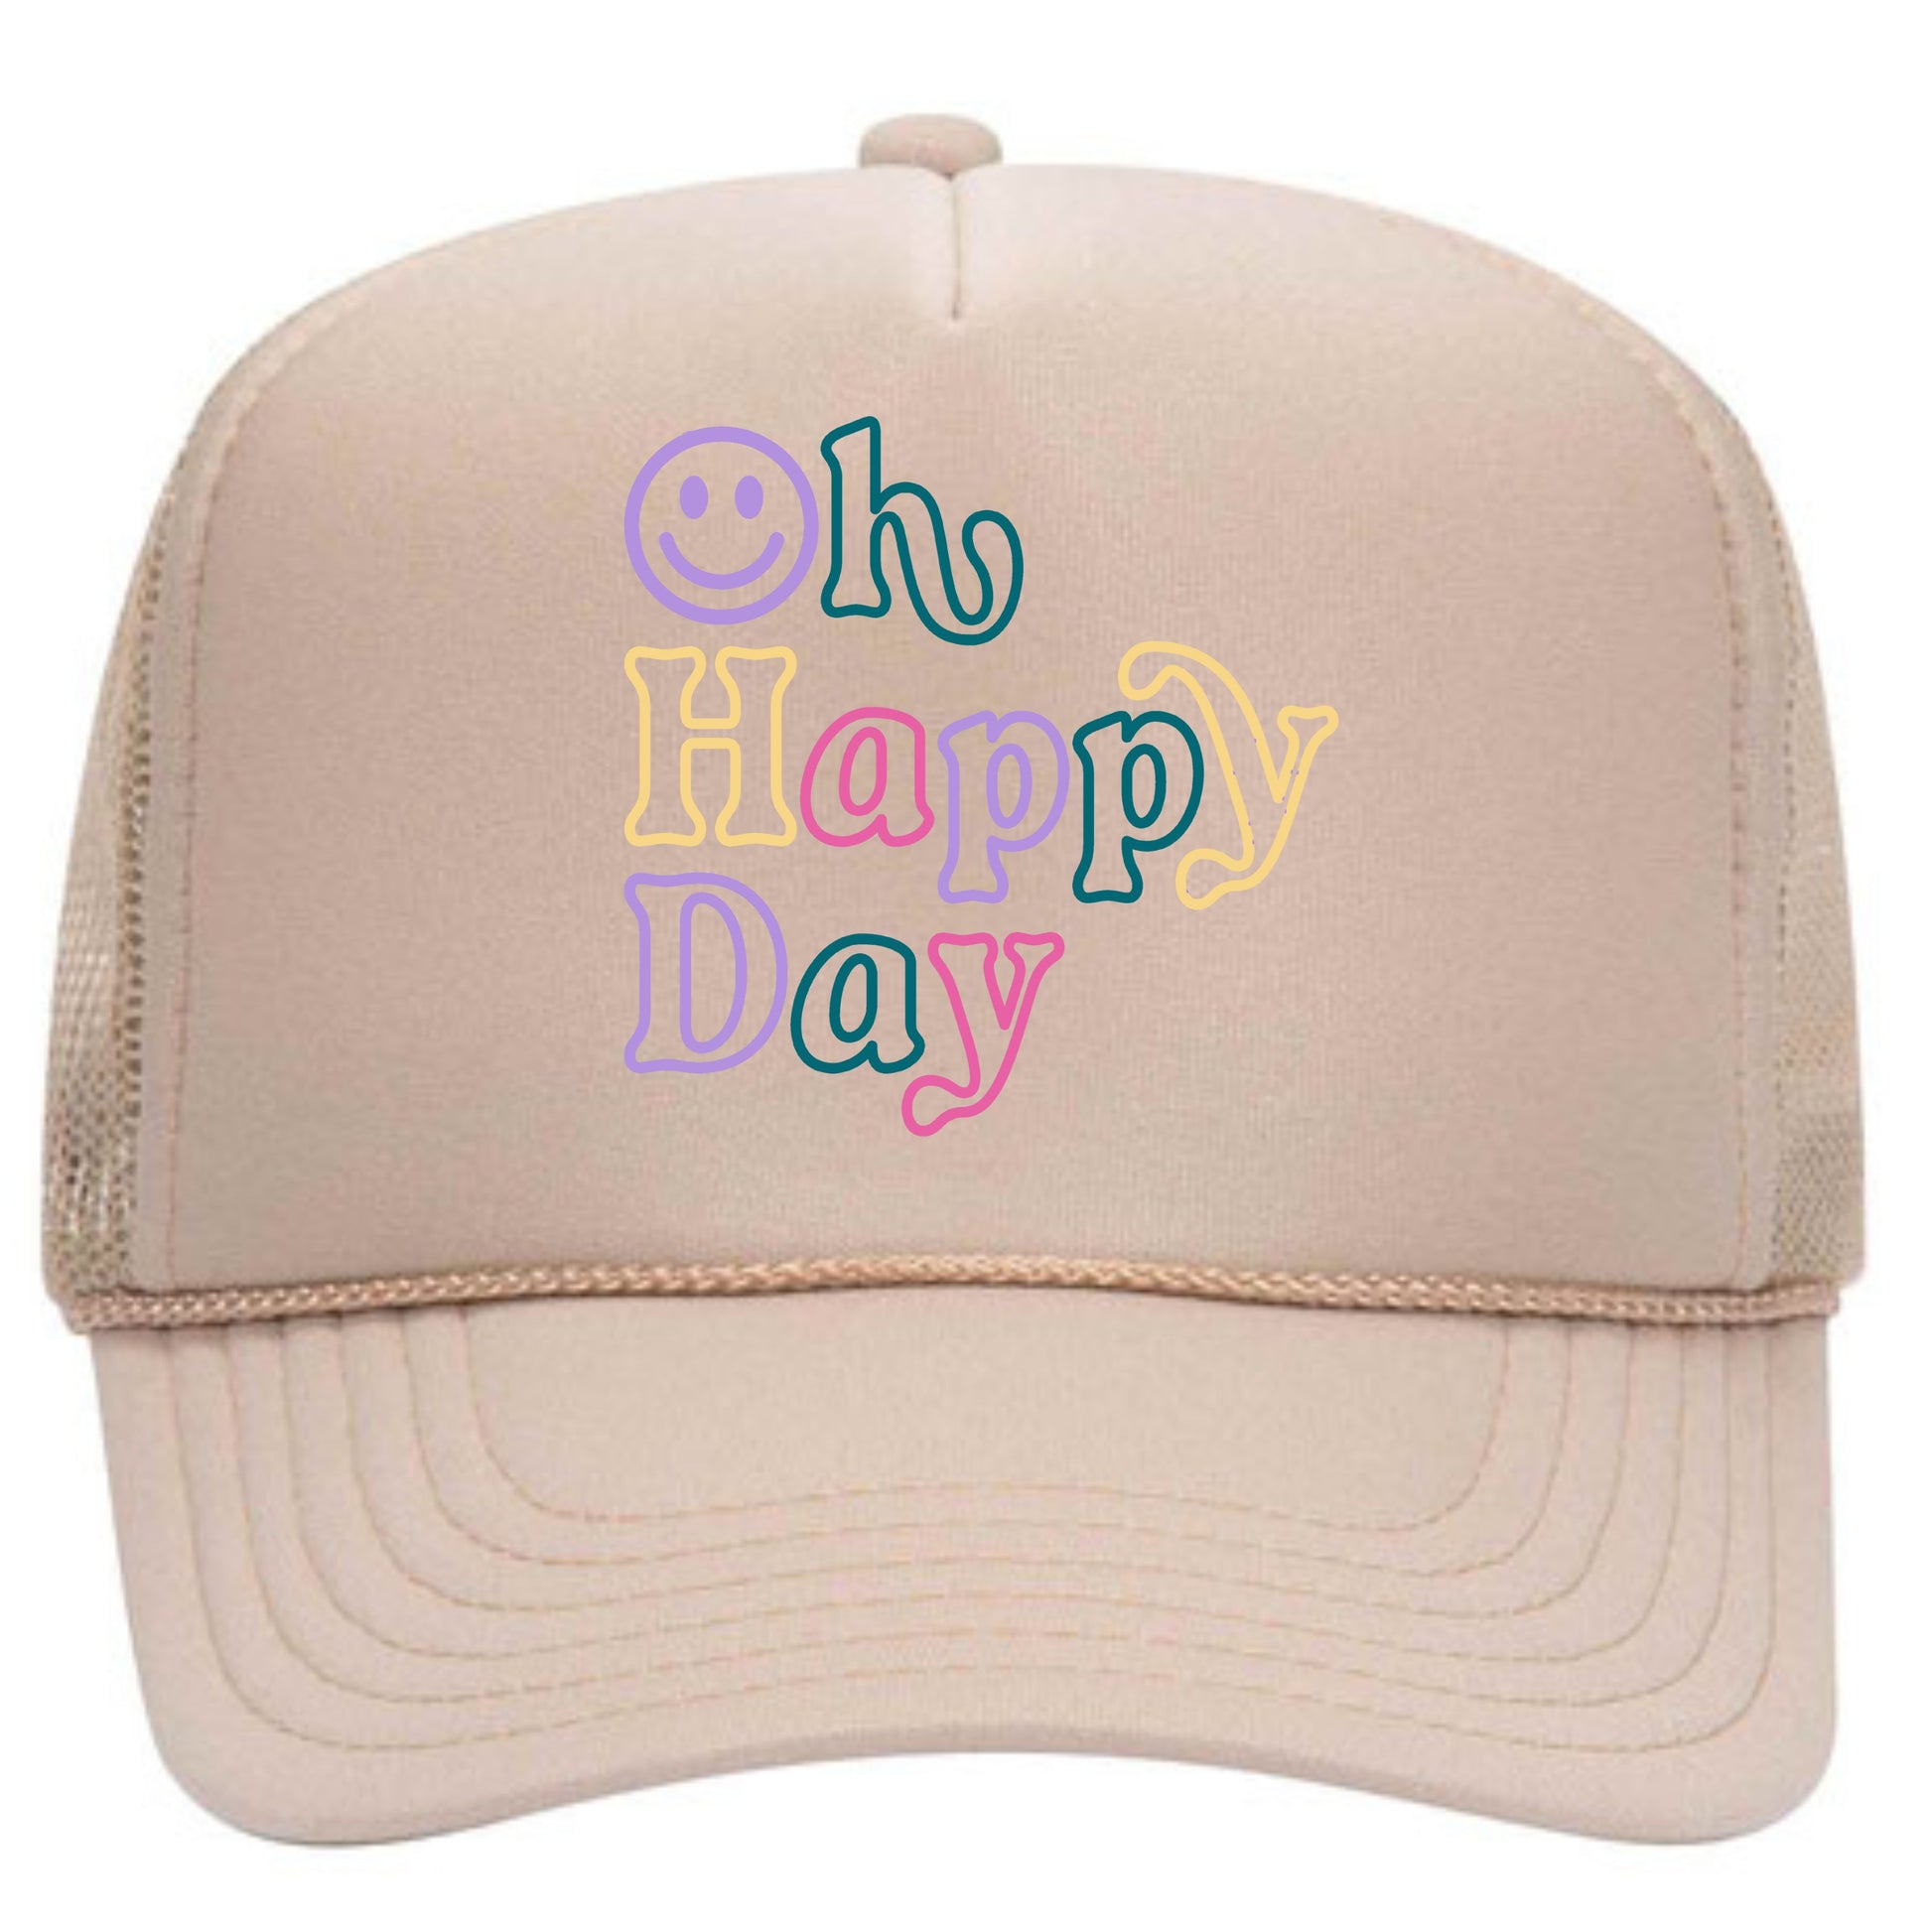 Oh Happy Day | Adult Trucker Hat-Hats-Sister Shirts-Sister Shirts, Cute & Custom Tees for Mama & Littles in Trussville, Alabama.